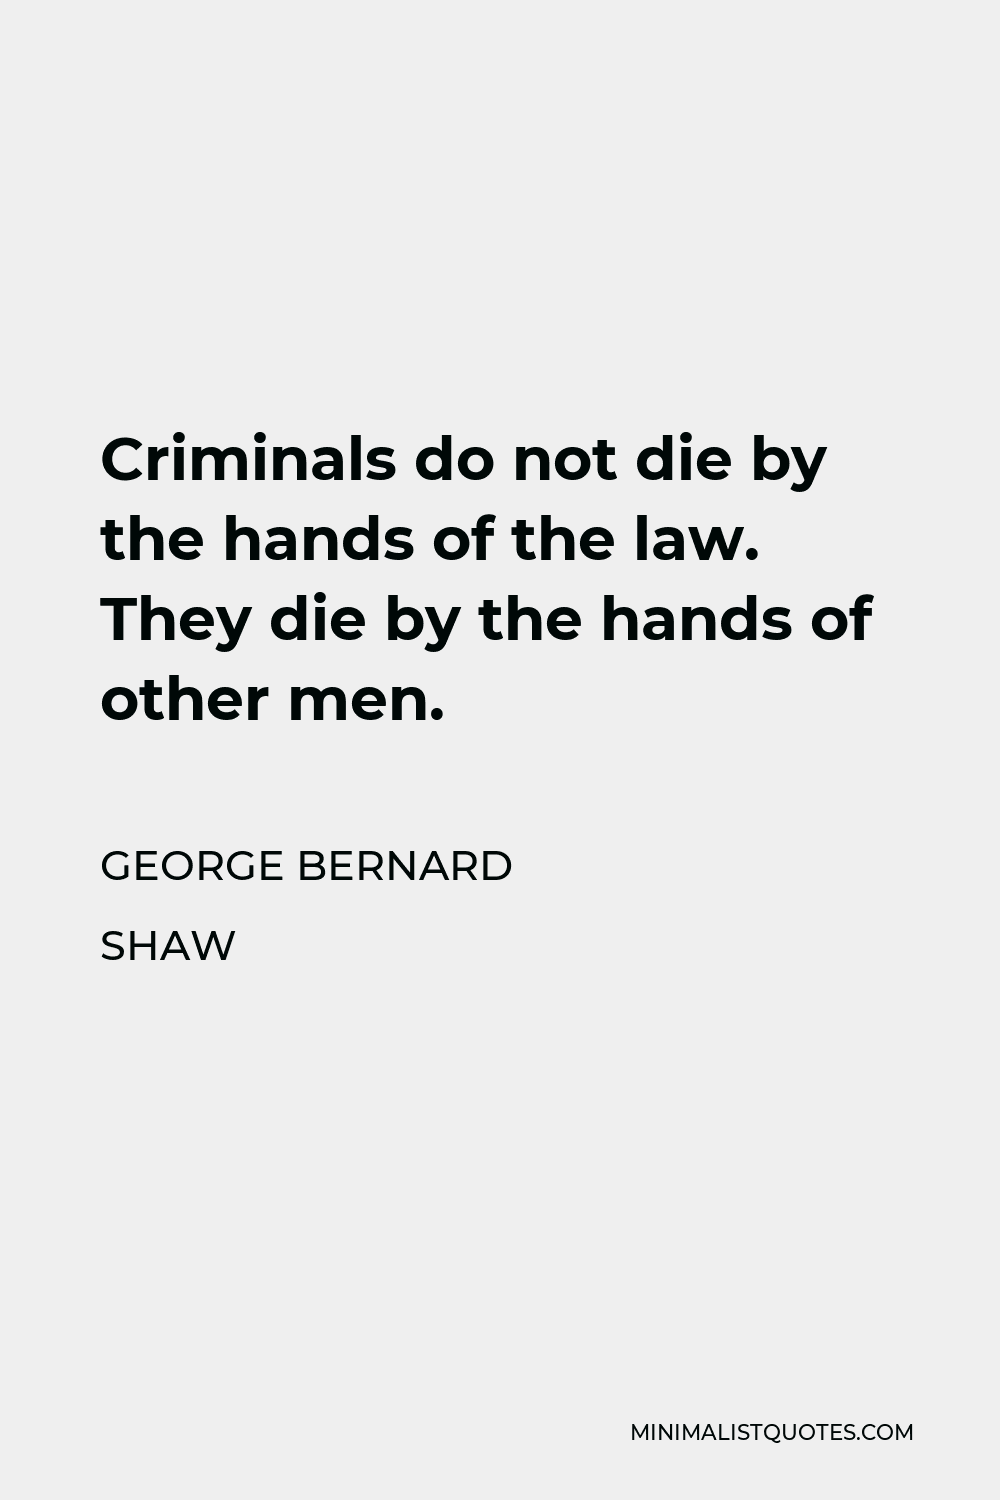 George Bernard Shaw Quote - Criminals do not die by the hands of the law. They die by the hands of other men.